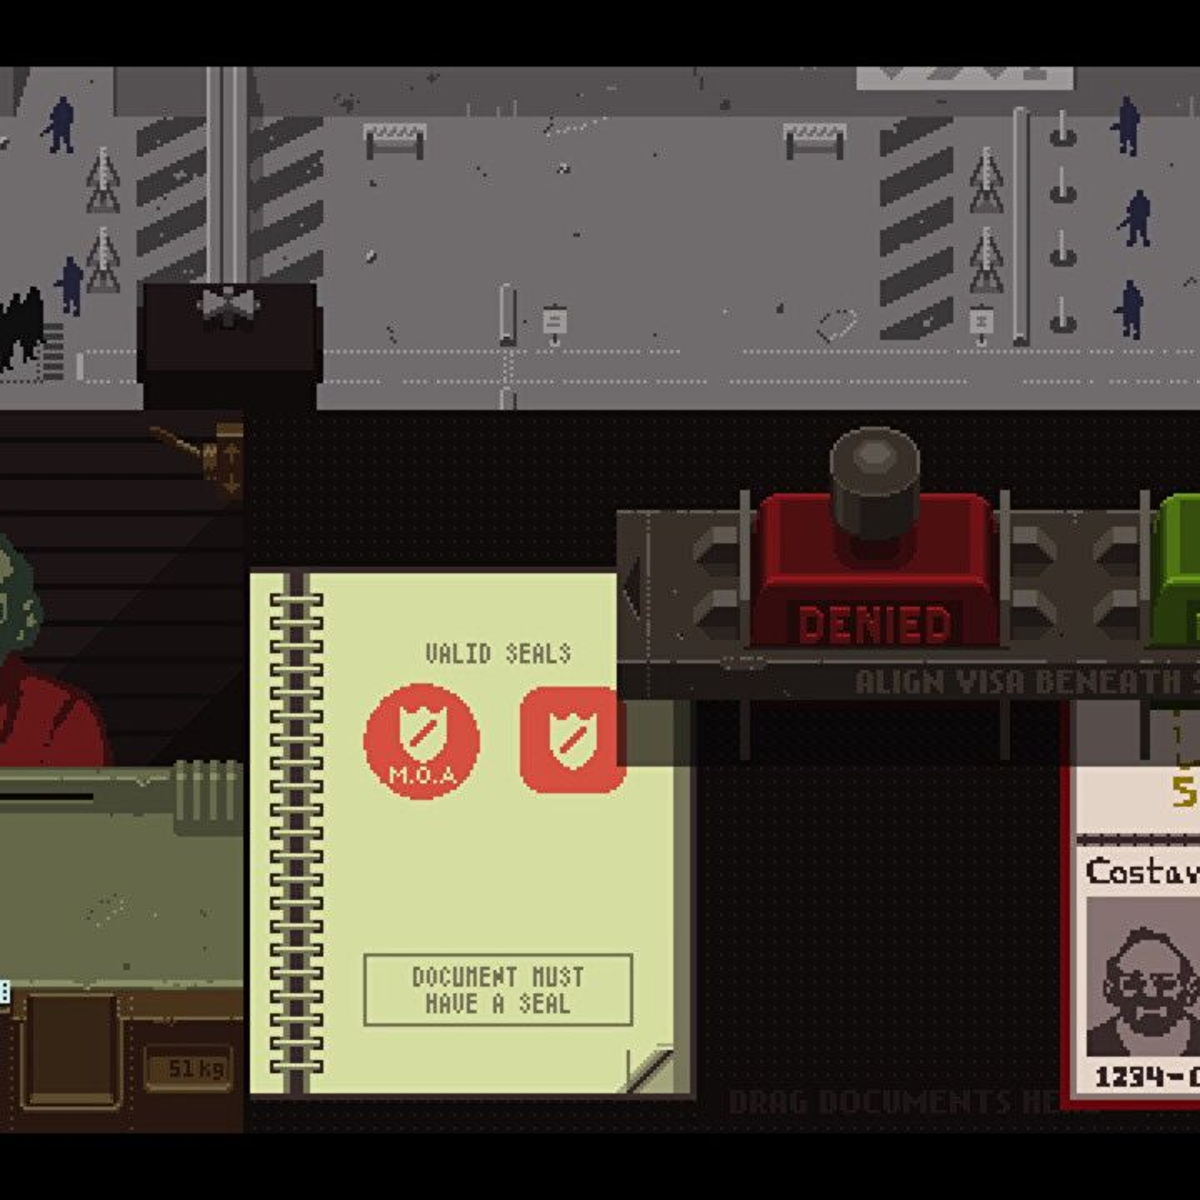 That s not my neighbor papers please. Papers please Скриншоты. Карта papers please. Карта из игры papers please с городами и дорогами. РП пеперс плиз.